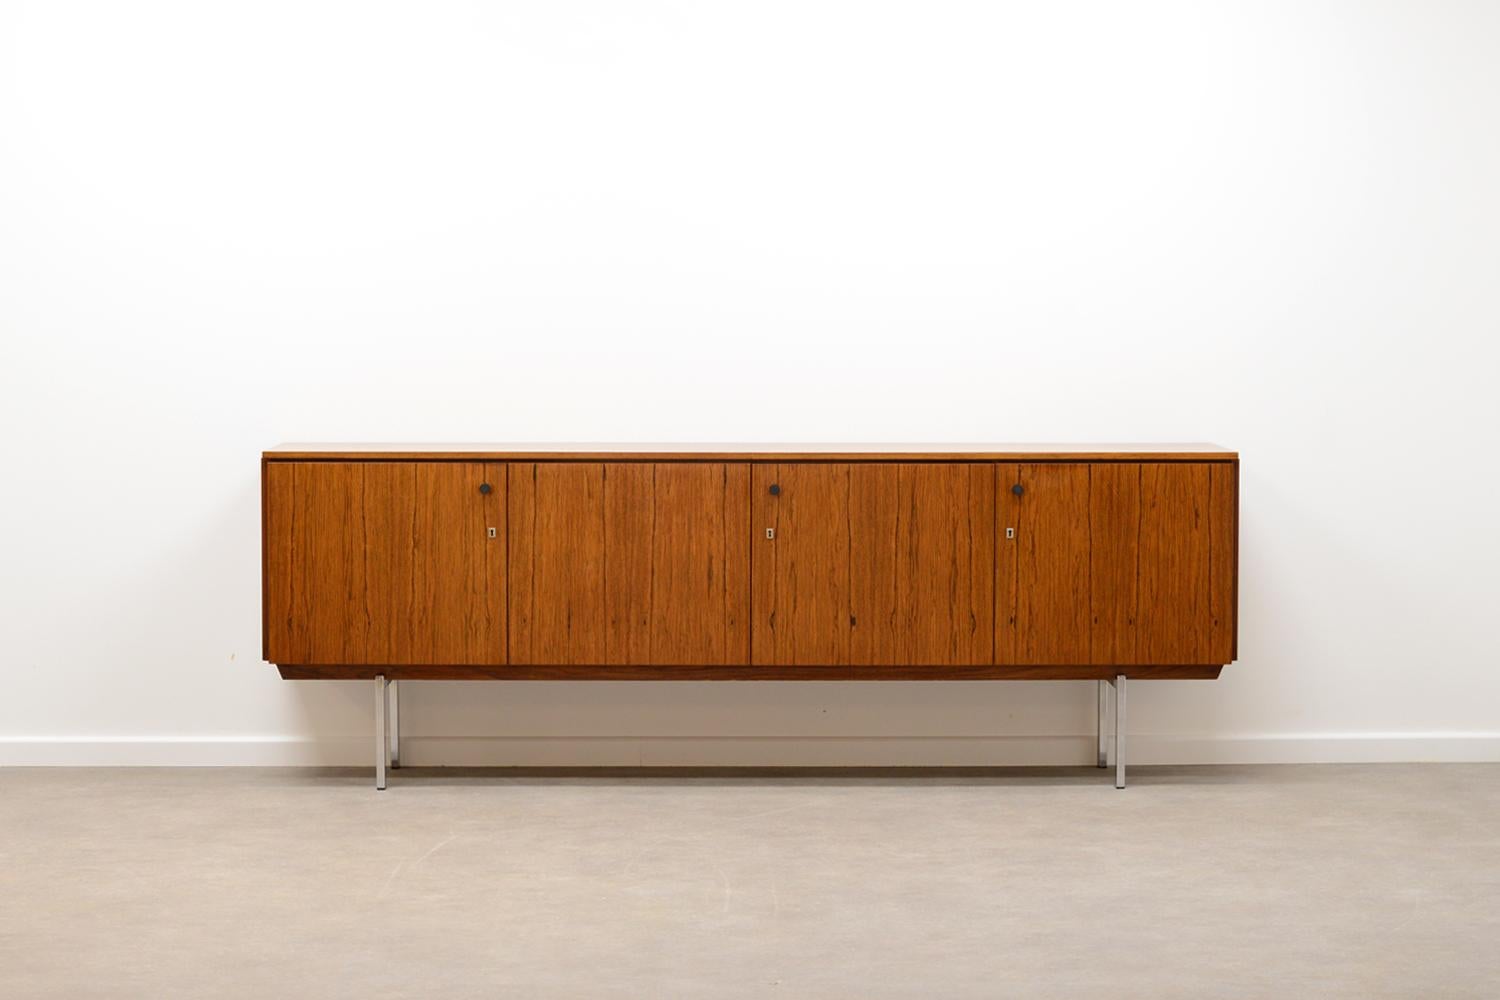 Rosewood sideboard made in germany 1965 by Gebrüder Laker. Rio Rosewood veneer and chrome base. Behind the 4 doors are shelving and two drawers. only the middel lock (with key) is functional, doors close with magnets. In very good vintage condition.